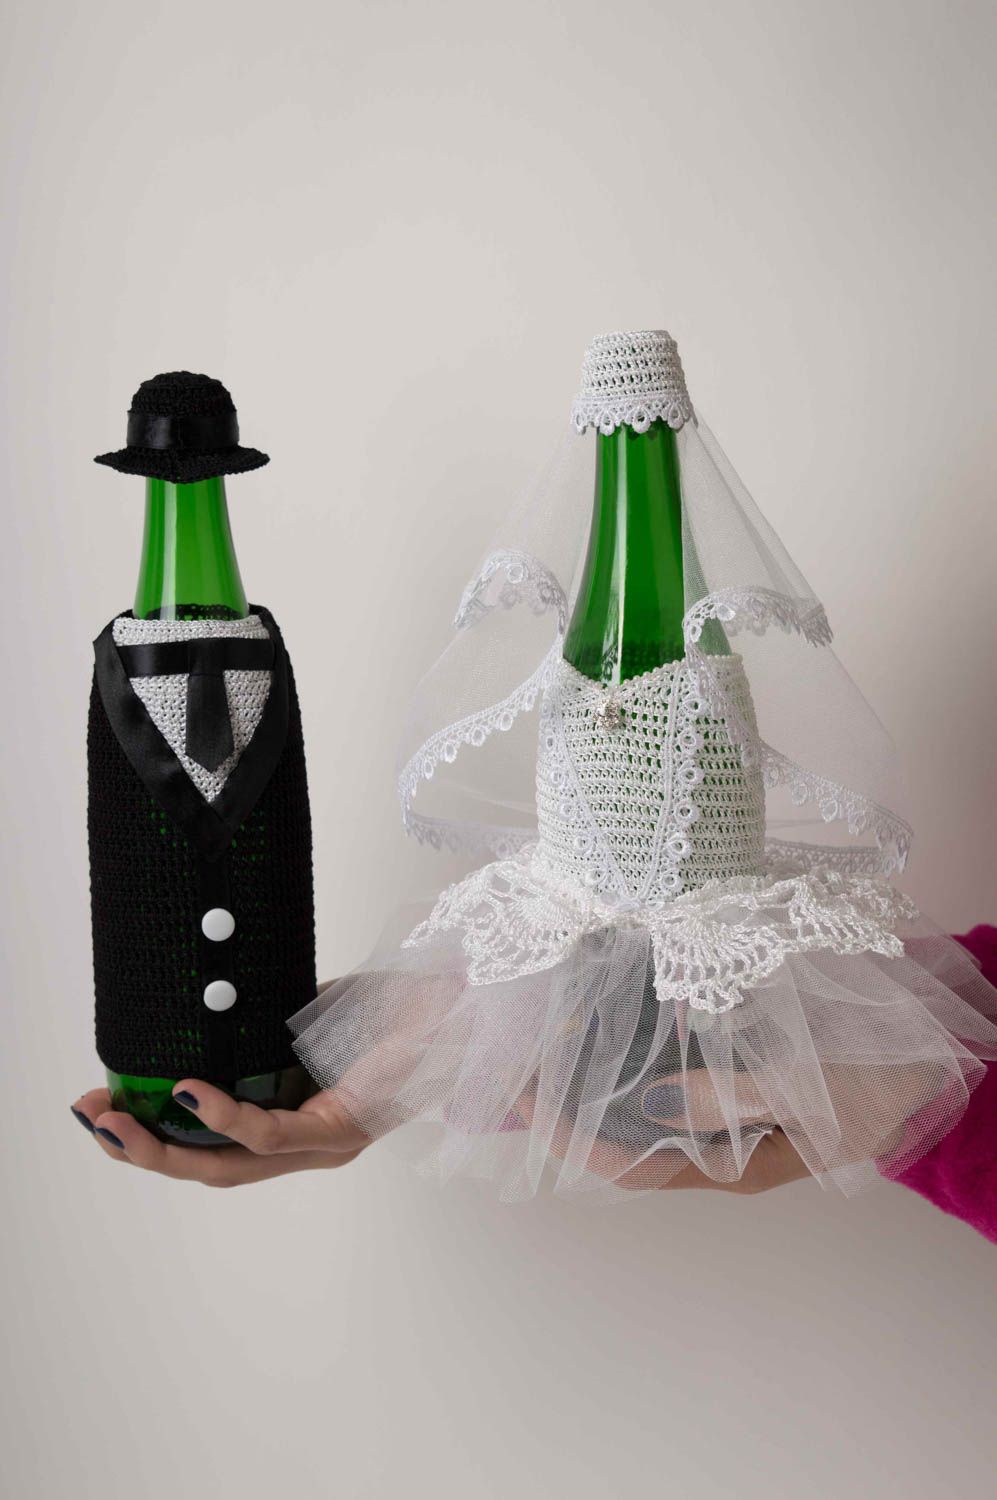 Handmade champagne bottle covers wedding bottle covers bottle cozy 2 pieces photo 2